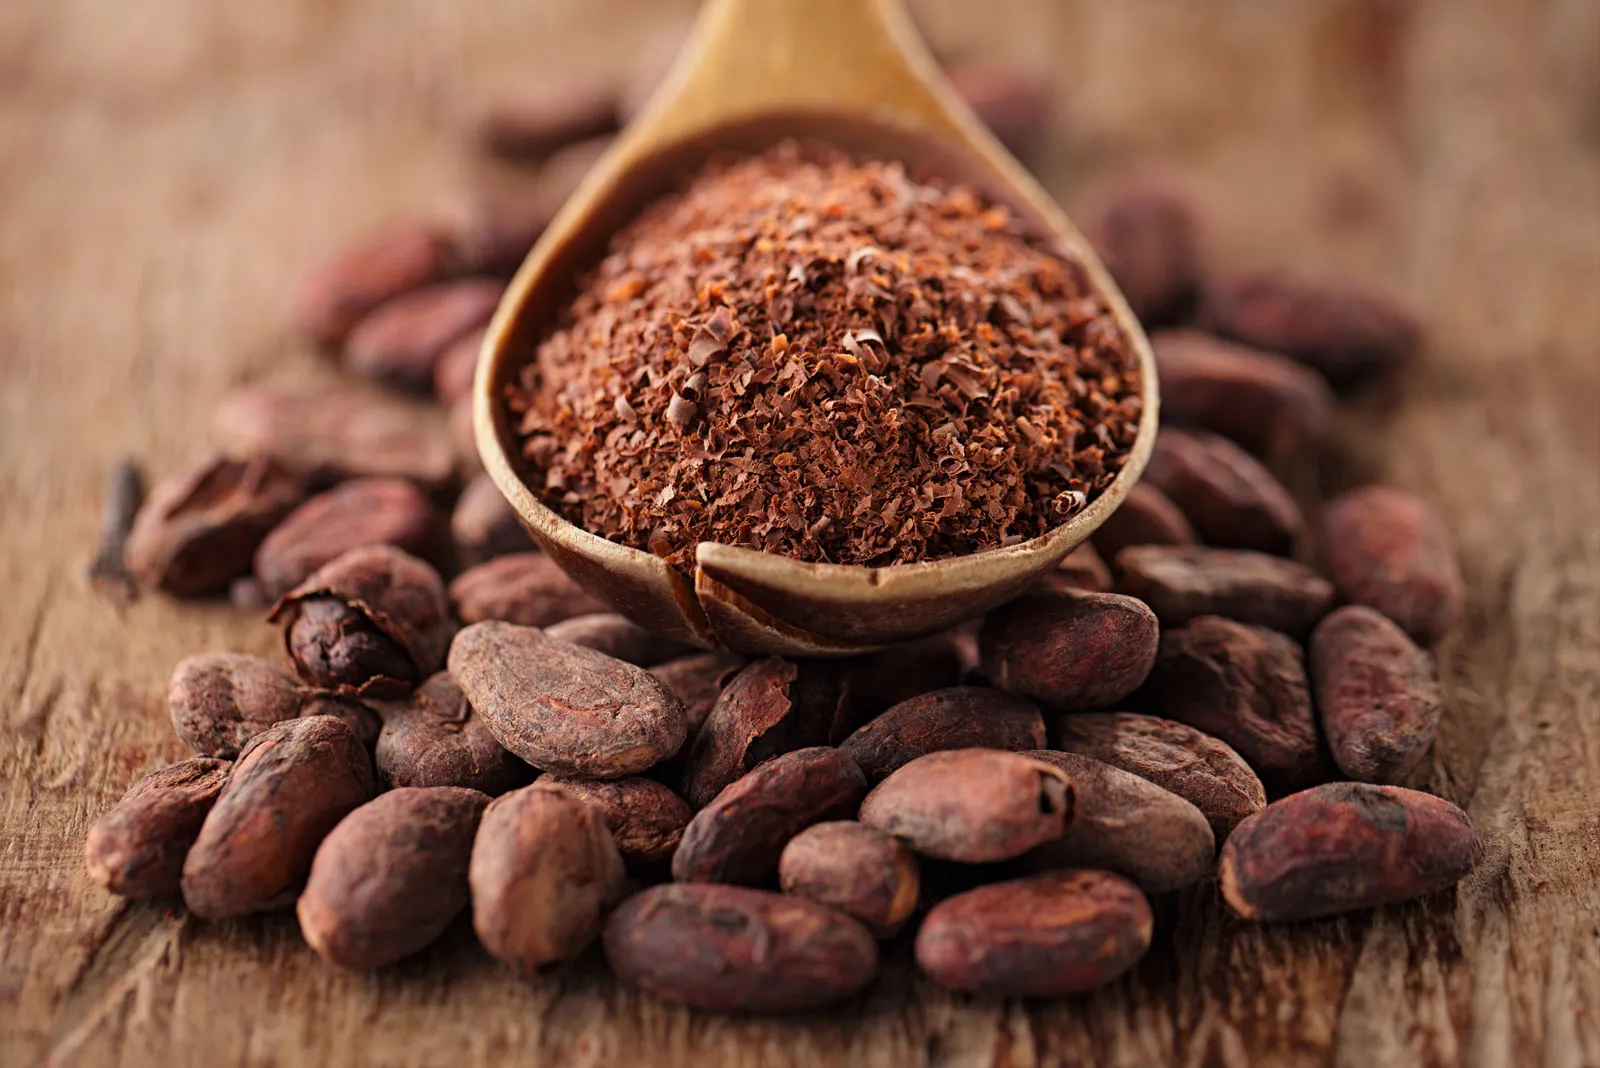 In older adults, cocoa extract may help lower the risk of cognitive decline